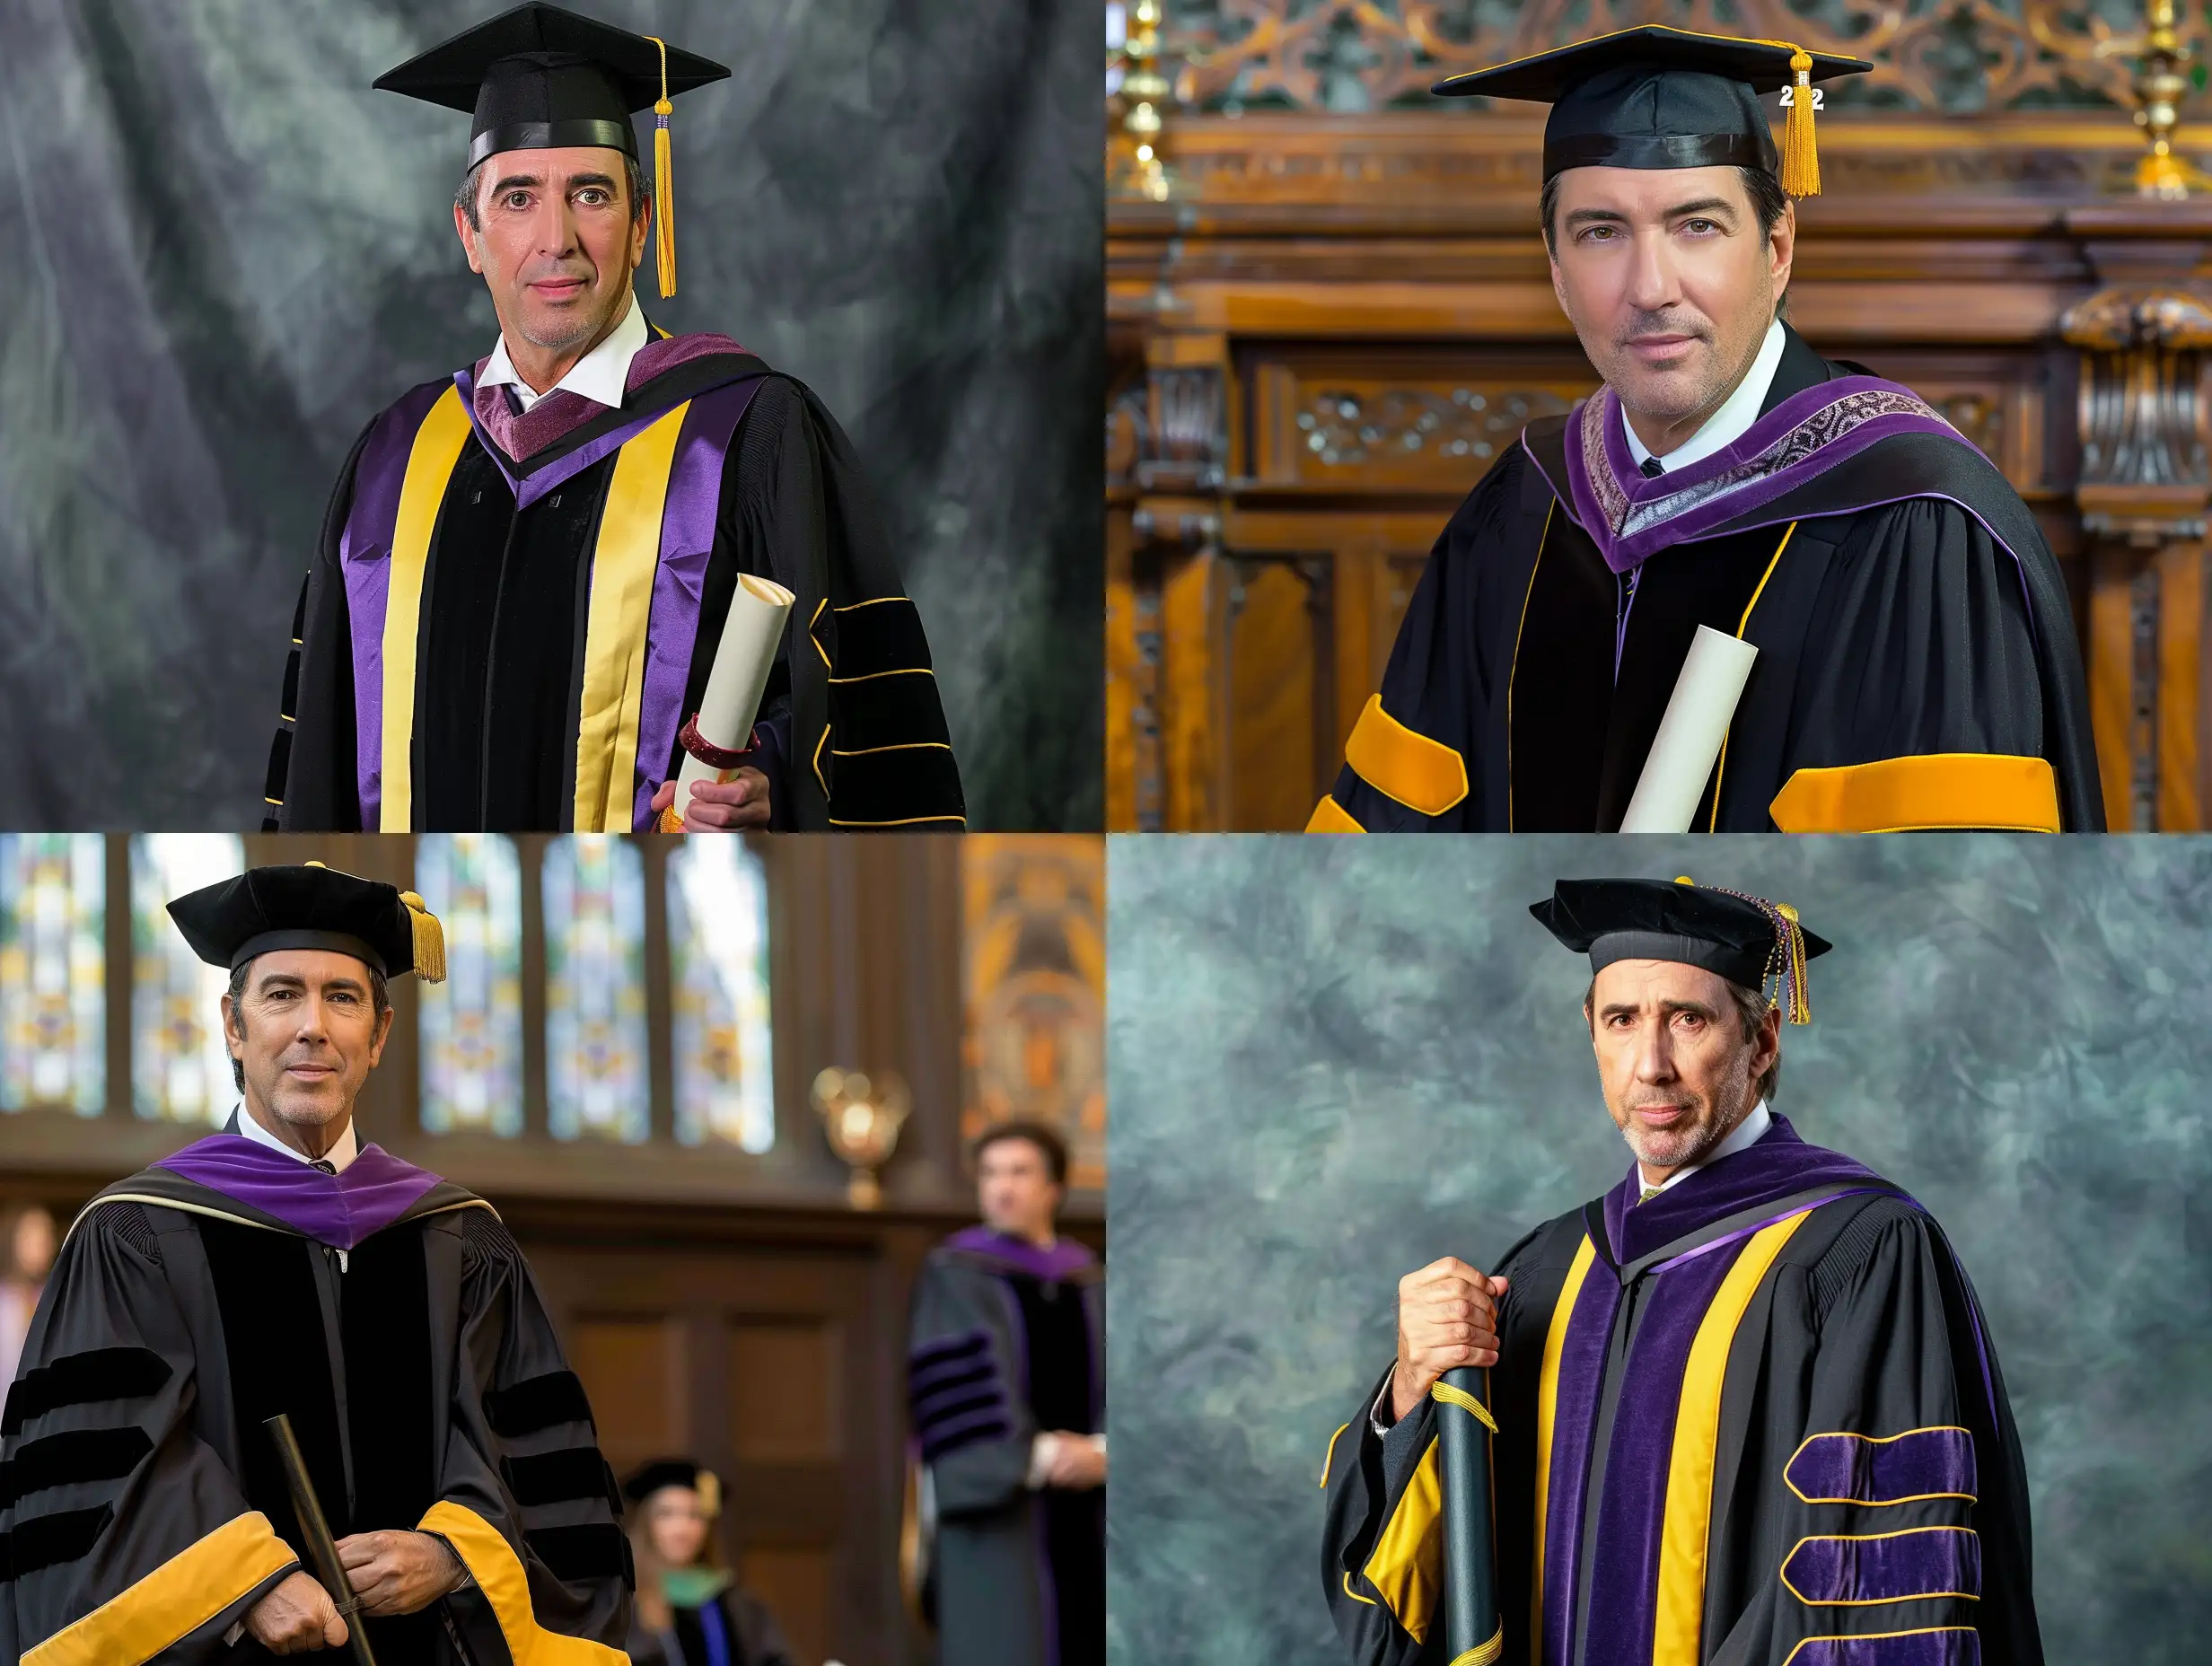 Nicolas-Cage-University-Graduation-Portrait-with-Mortarboard-Cap-and-Scroll